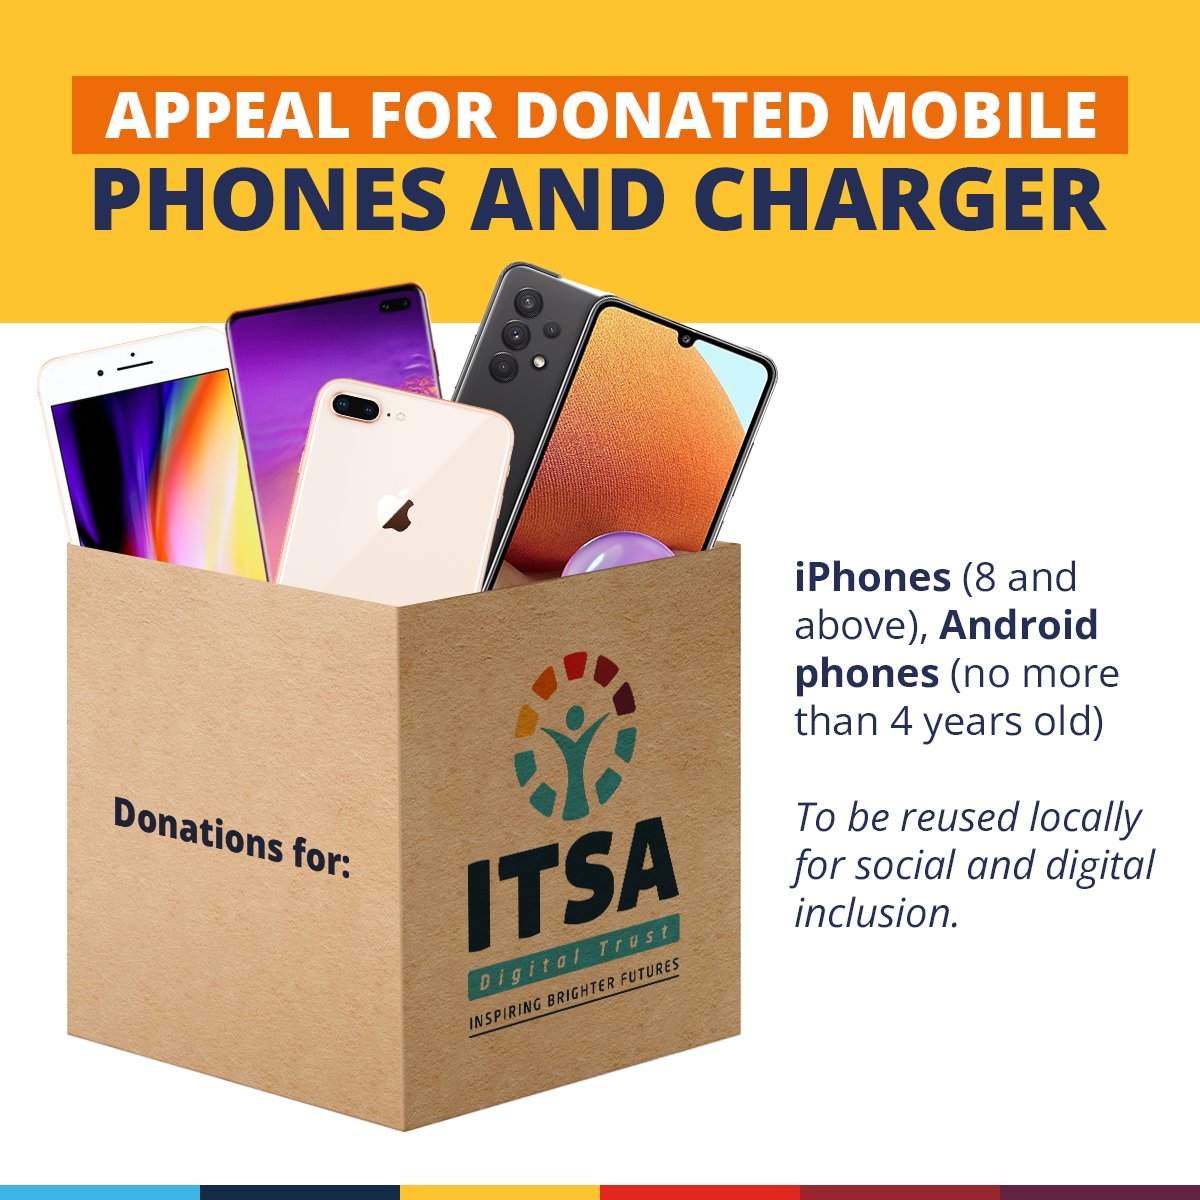 Are you upgrading your phone? We will reuse it and give someone the gift of technology for social and digital inclusion projects in #Gloucestershire